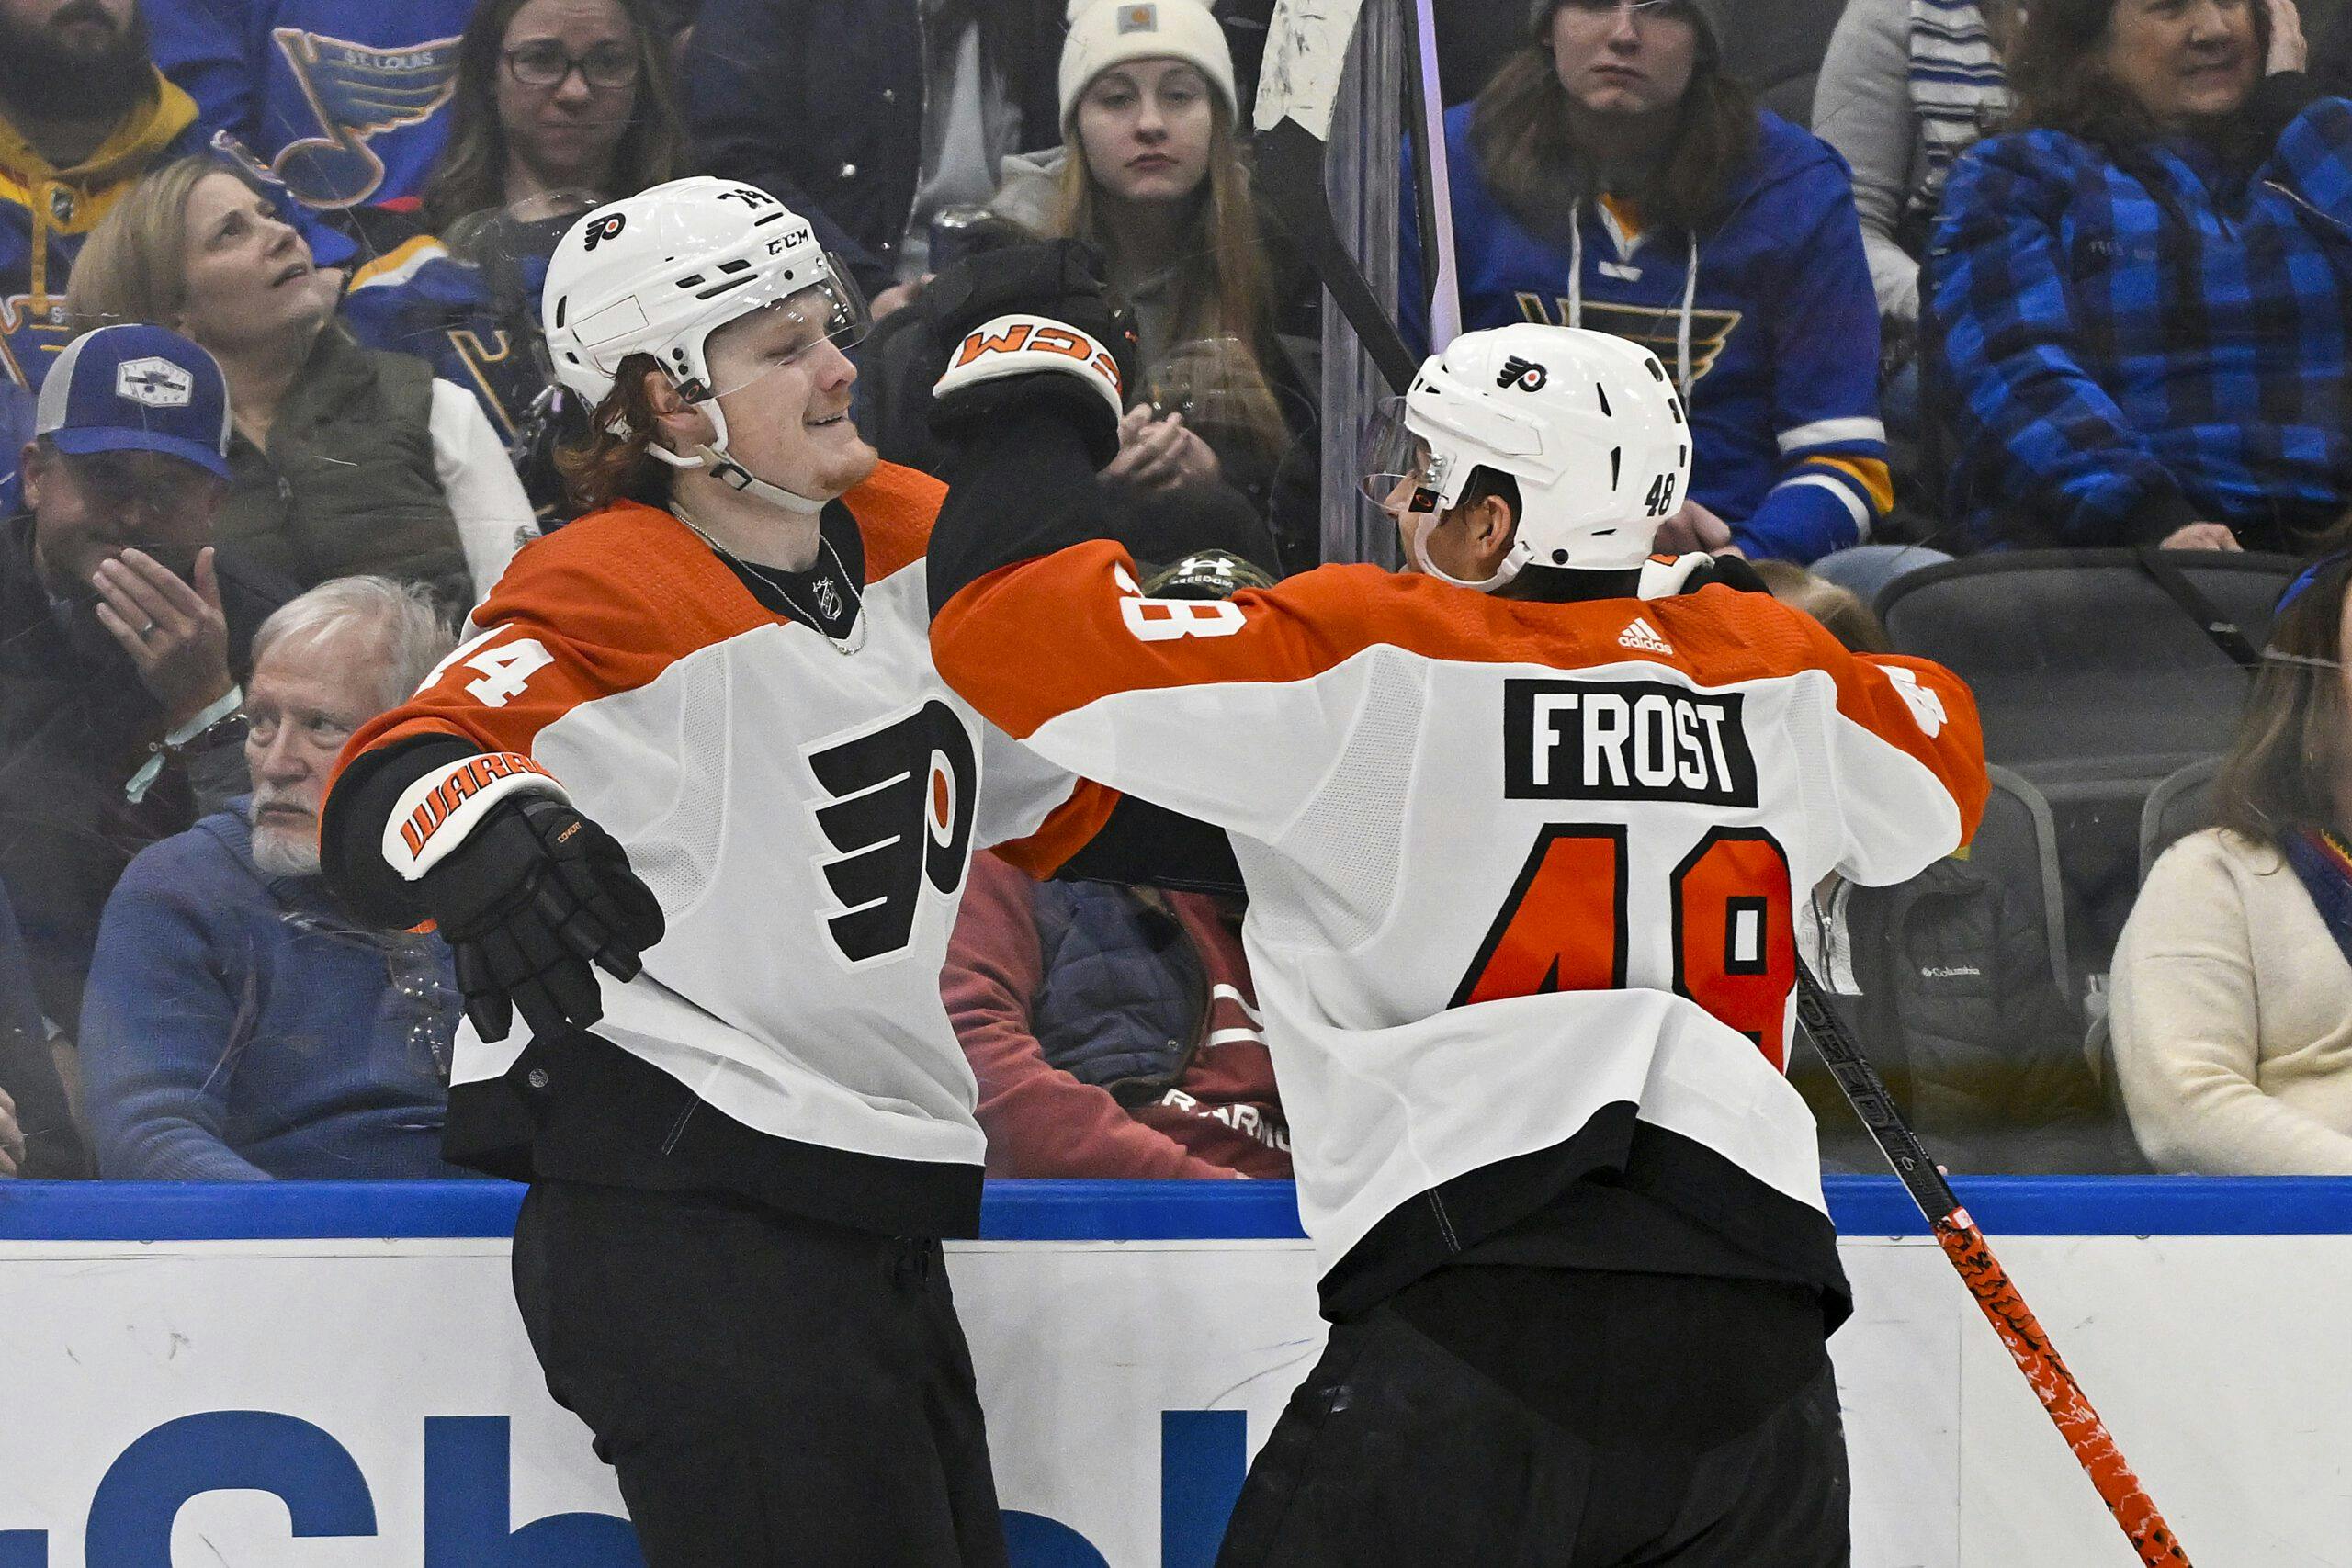 ‘We’re looking to prove people wrong:’ Flyers’ Morgan Frost wants to show team’s strong season was no fluke